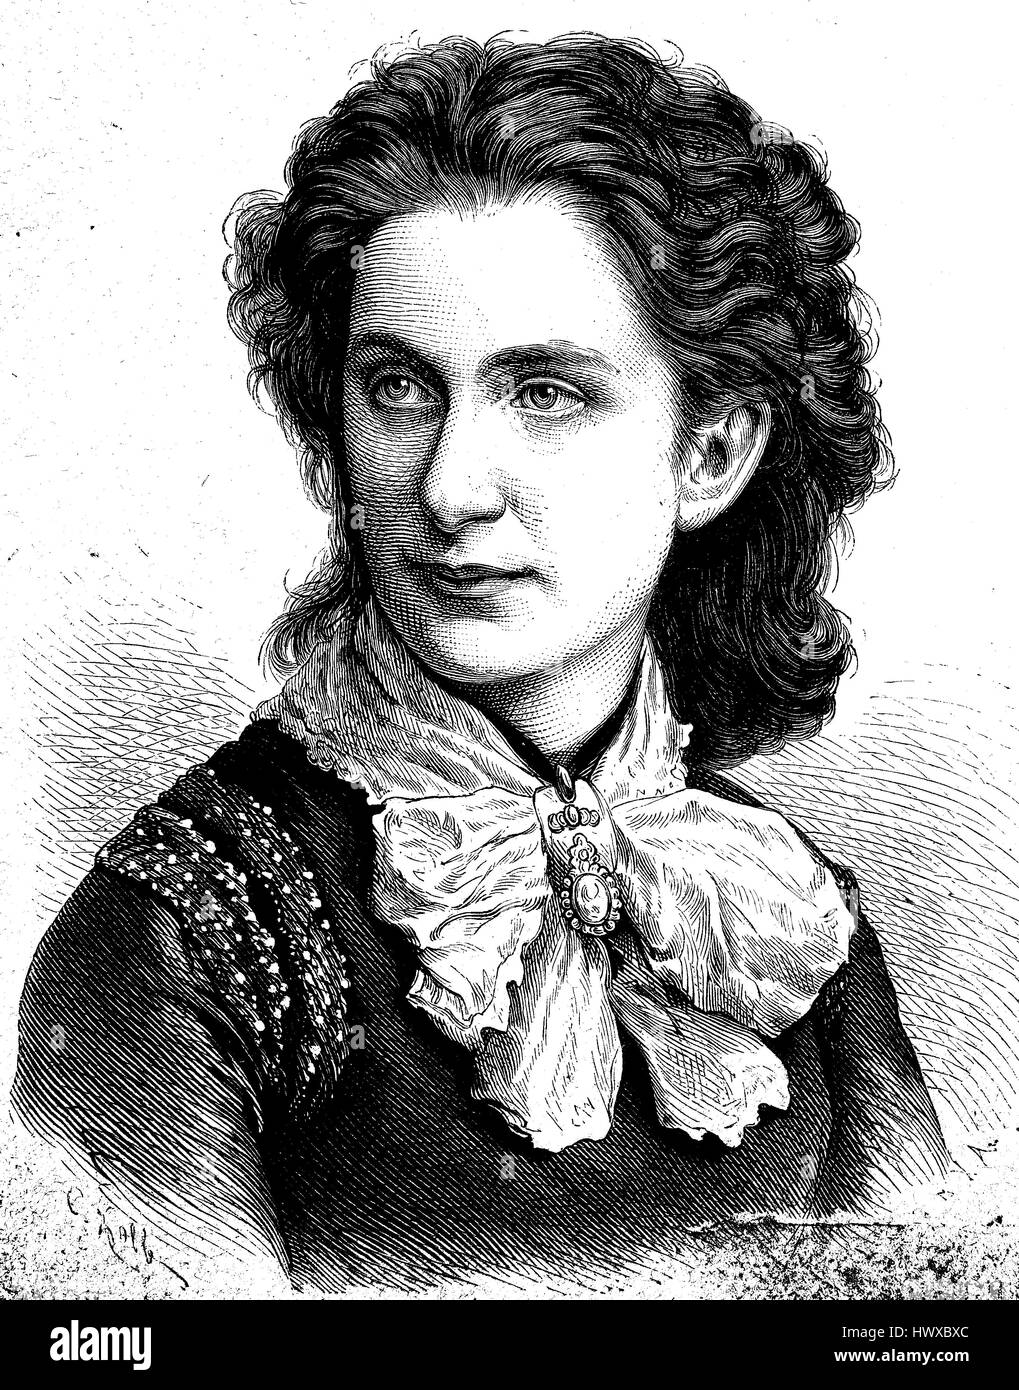 Auguste Wilbrandt-Baudius, born Auguste Baudius, 1. Juni 1843 - 30. März 1937, was a German Austrian actress, Germany, reproduction of an image, woodcut from the year 1881, digital improved Stock Photo